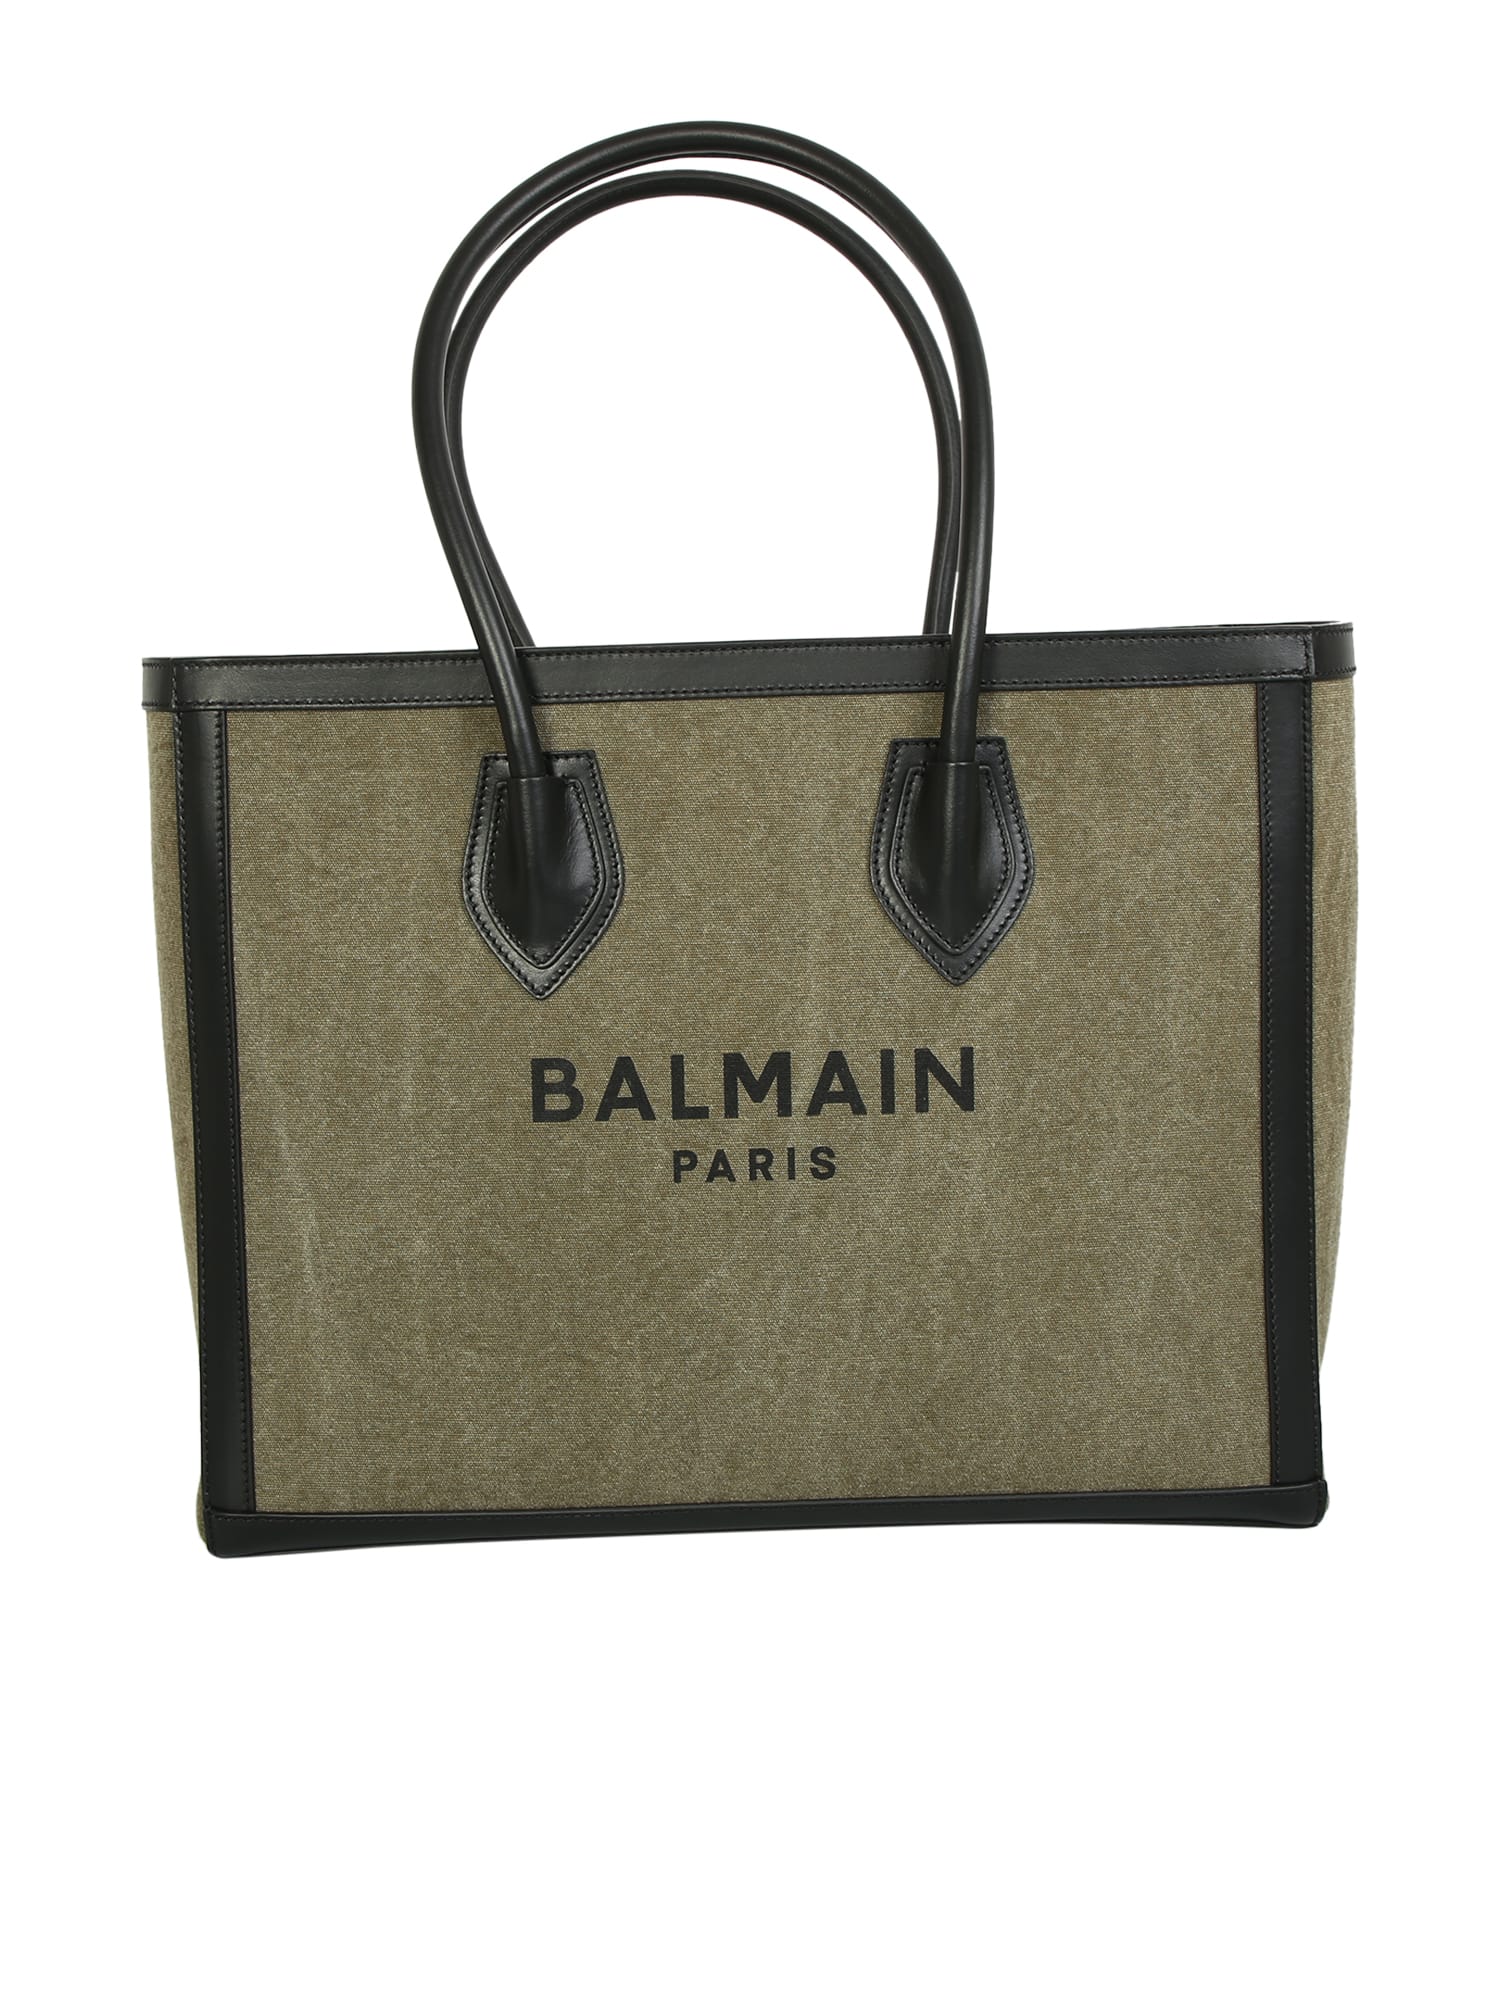 Balmain B-army Shopper Bag; This Whole Line Of The New Collection Is Inspired By The Maisons Military History